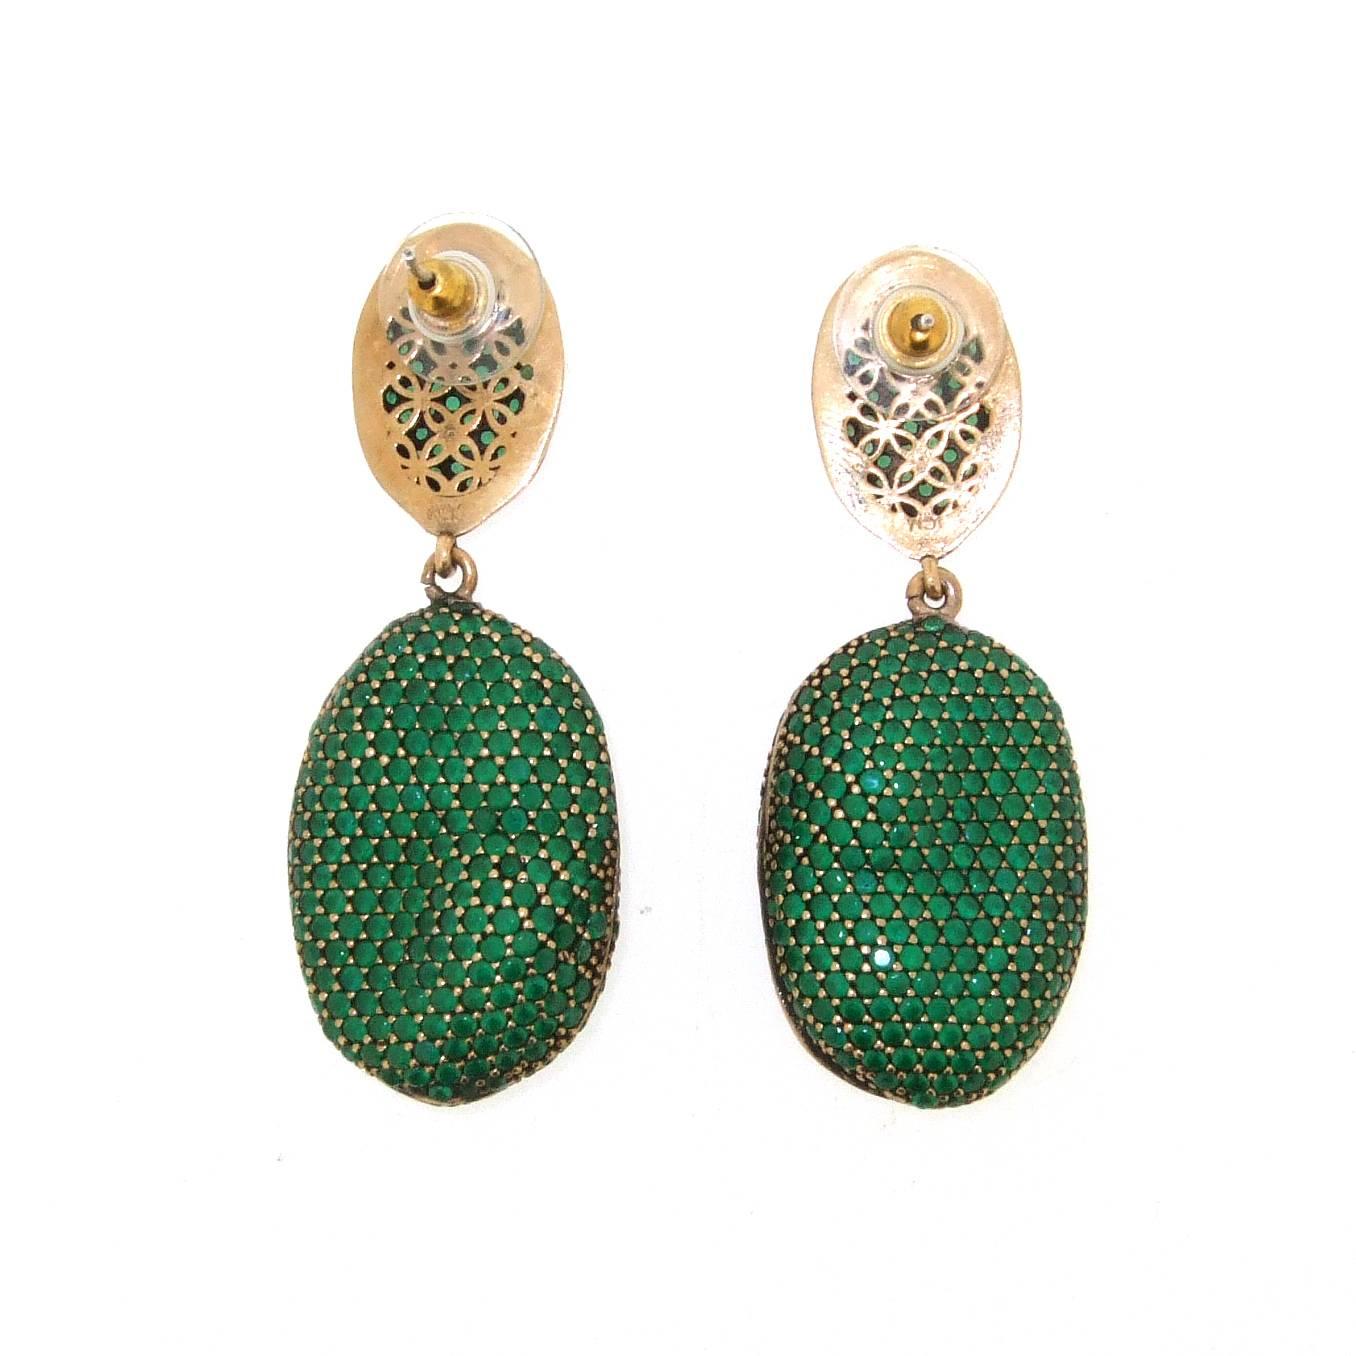 A stunning pair of pierced earrings by JCM London. Each misty emerald effect cubic zirconia encrusted pebble has a natural undulating uneven formation to give it the feel of the shape of a natural pebble. 

The smaller ovals measure 2cm long by